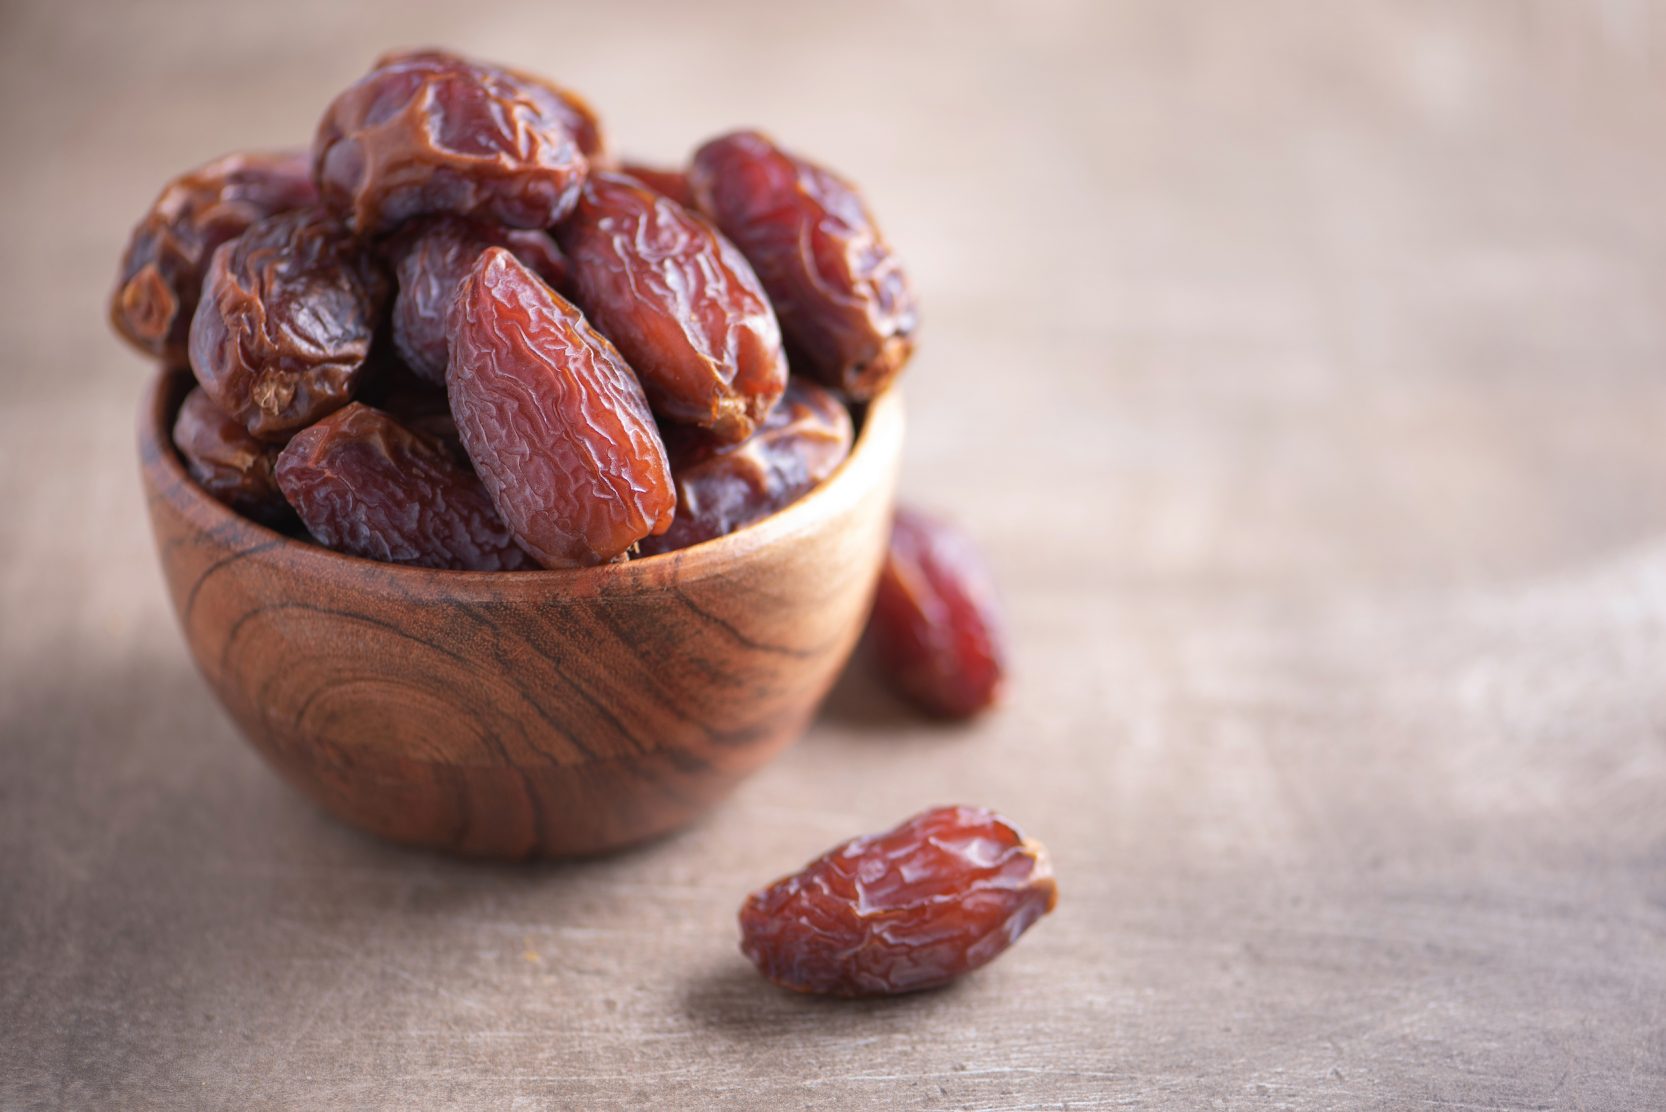 Fresh dates from local farms to hit market on July 20